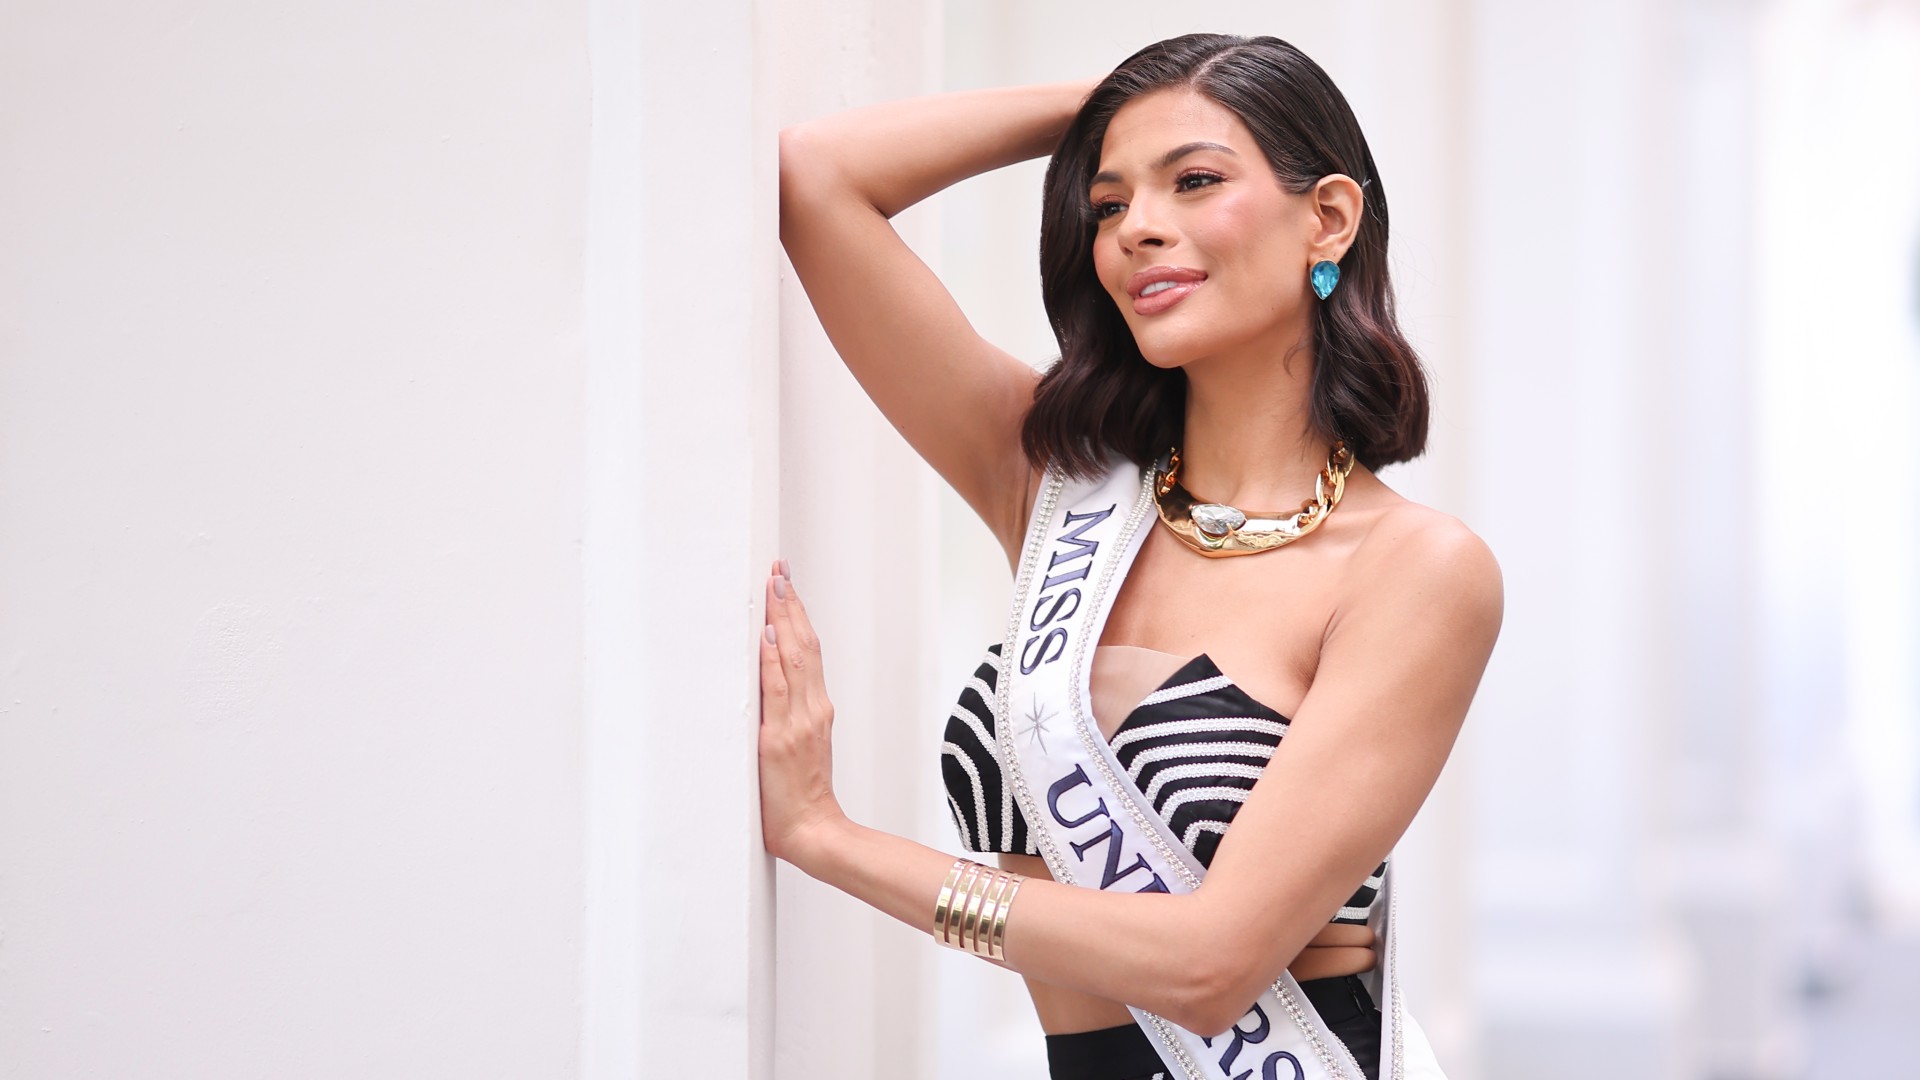 6 Miss Universe 2023 Contestants Who Make the Pageant More Inclusive